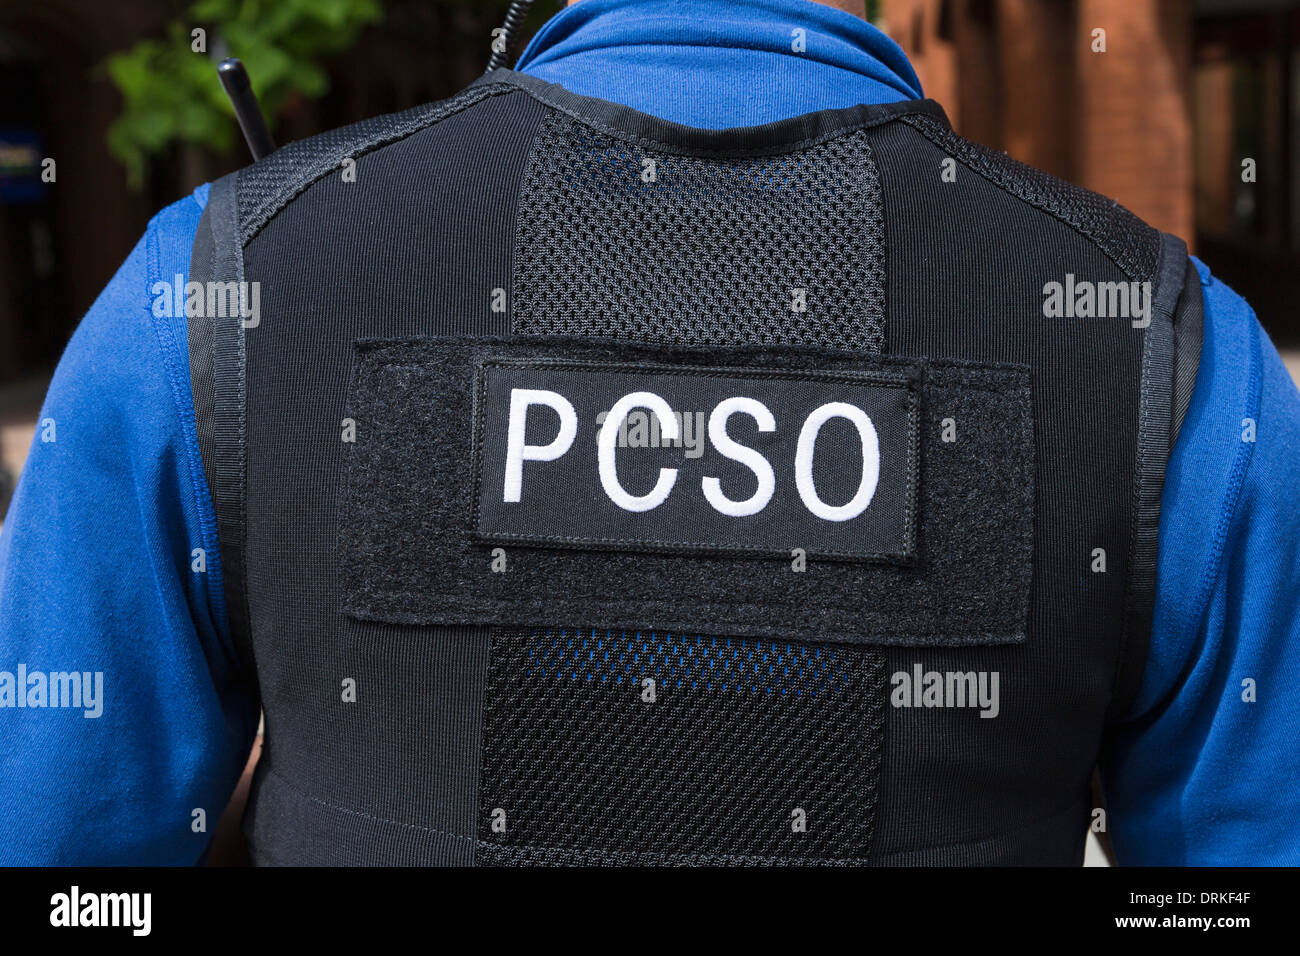 Police Community Support Officer, PCSO uniform, England Stock Photo